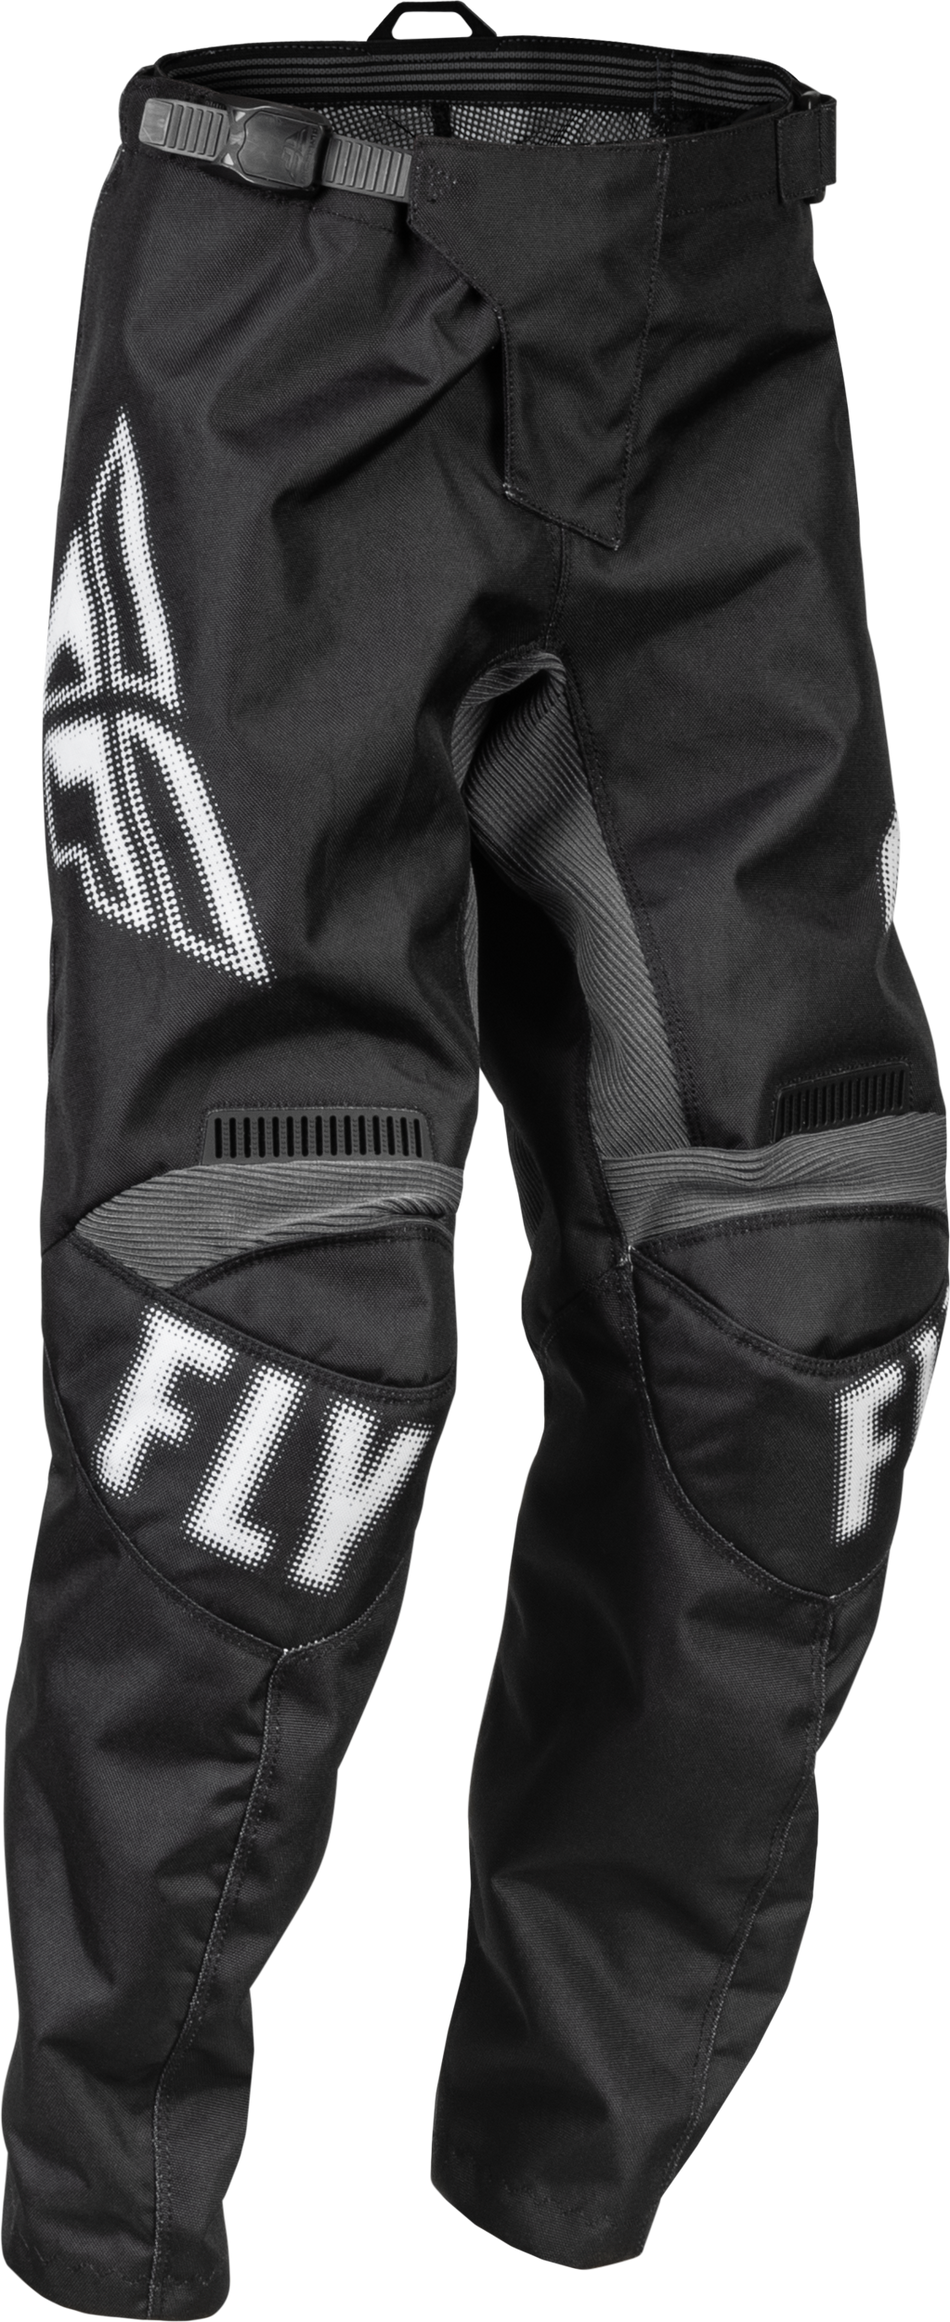 FLY RACING Youth F-16 Pants Black/White Sz 22 376-23222